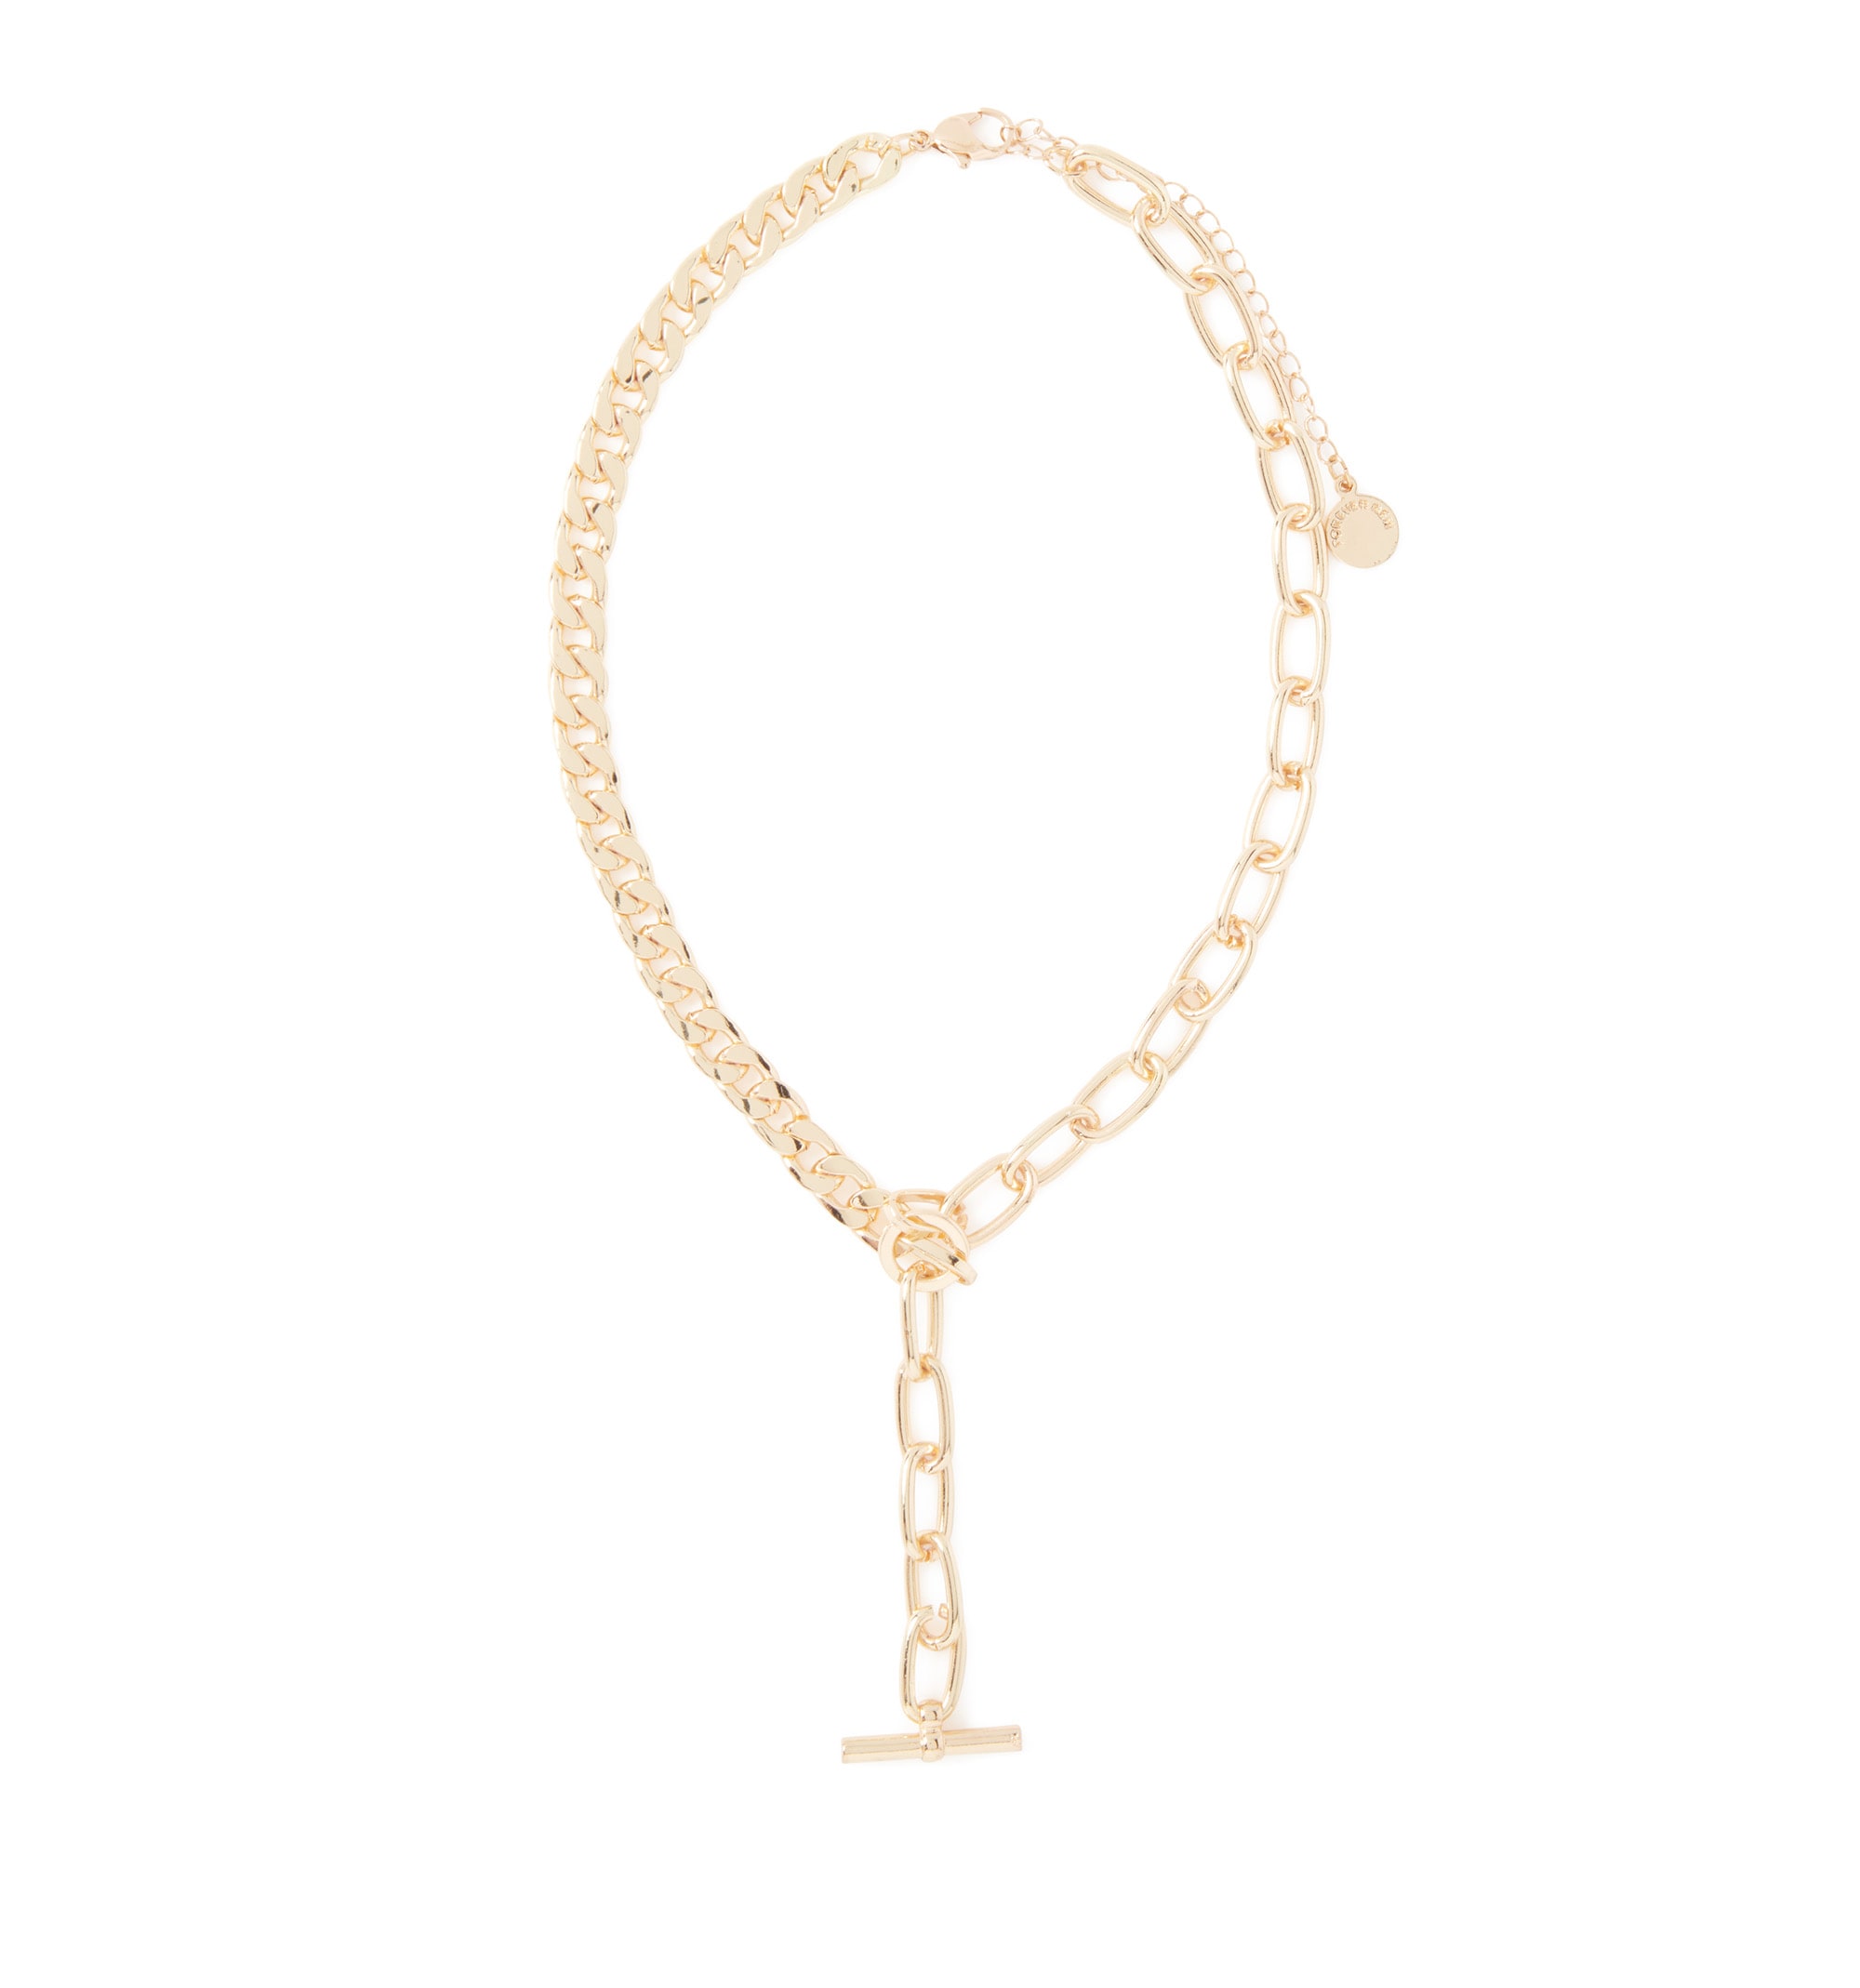 Topshop Nina chunky square link T-bar necklace in gold tone | ASOS